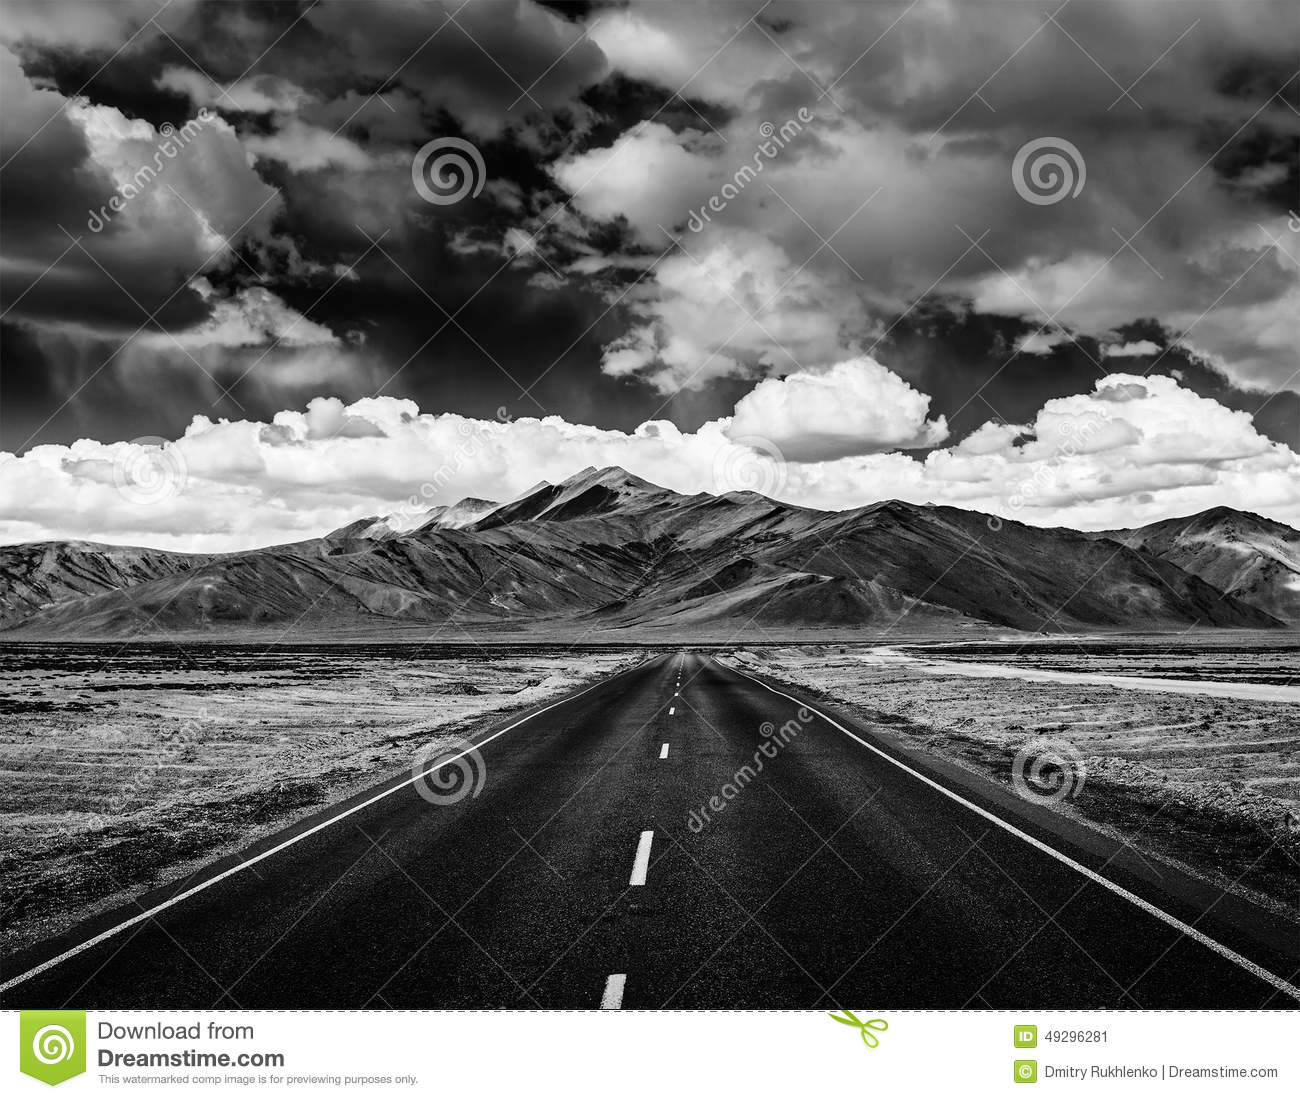 Concept Background   Road On Plains In Himalayas With Mountains